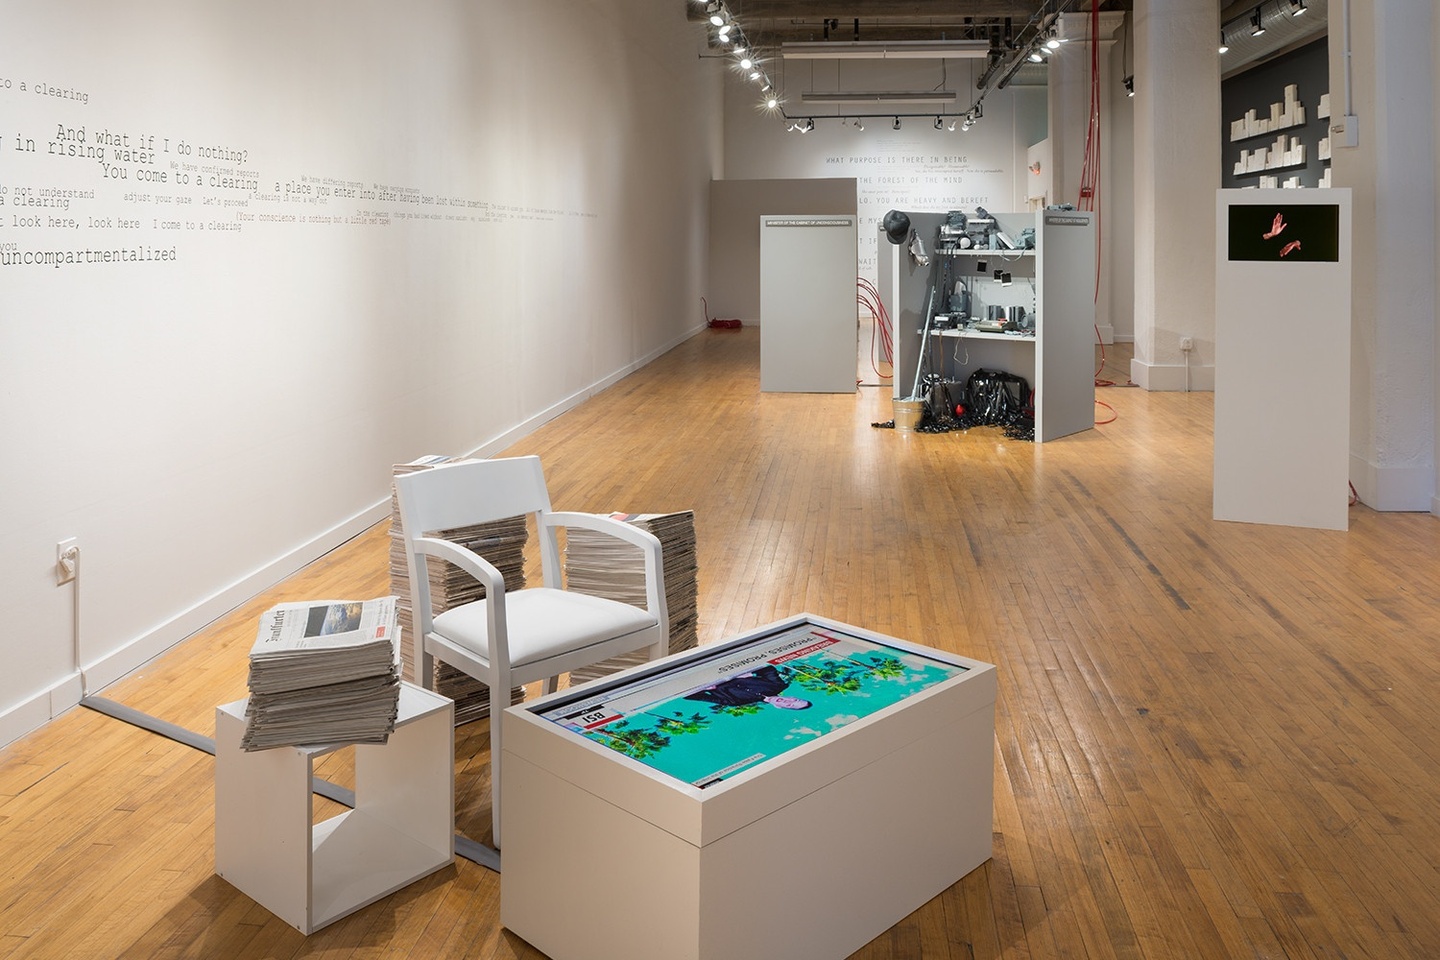 Installation view of a gallery space: in the foreground, a chair next to a video on a screen in a white platform/box, with stacks of newspapers surrounding this all. In the background, wires from exposed machinery and other artworks mounted to the wall. The walls are white with some text running along it in a typewriter font. The floors are wooden.